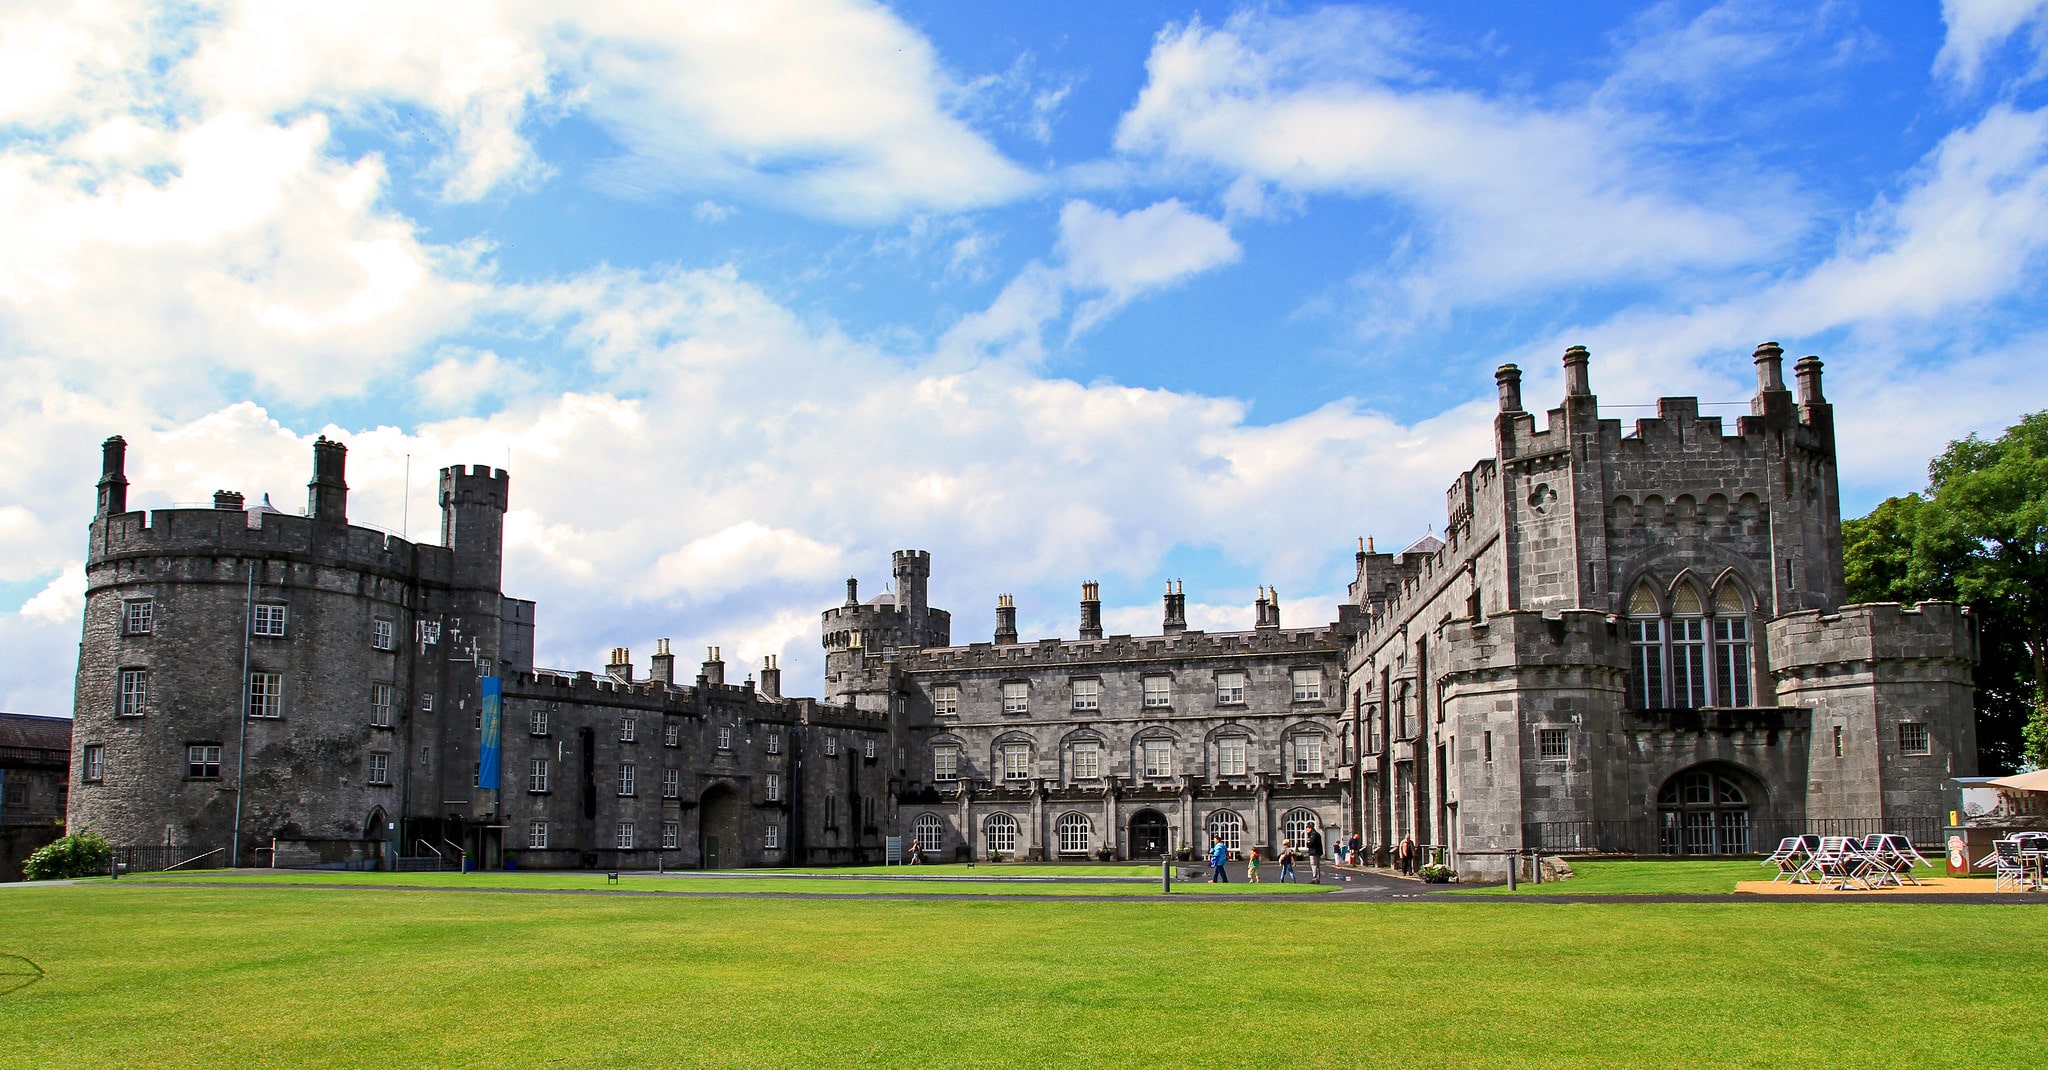 Exploring Kilkenny Castle is a great thing to do in Kilkenny Ireland